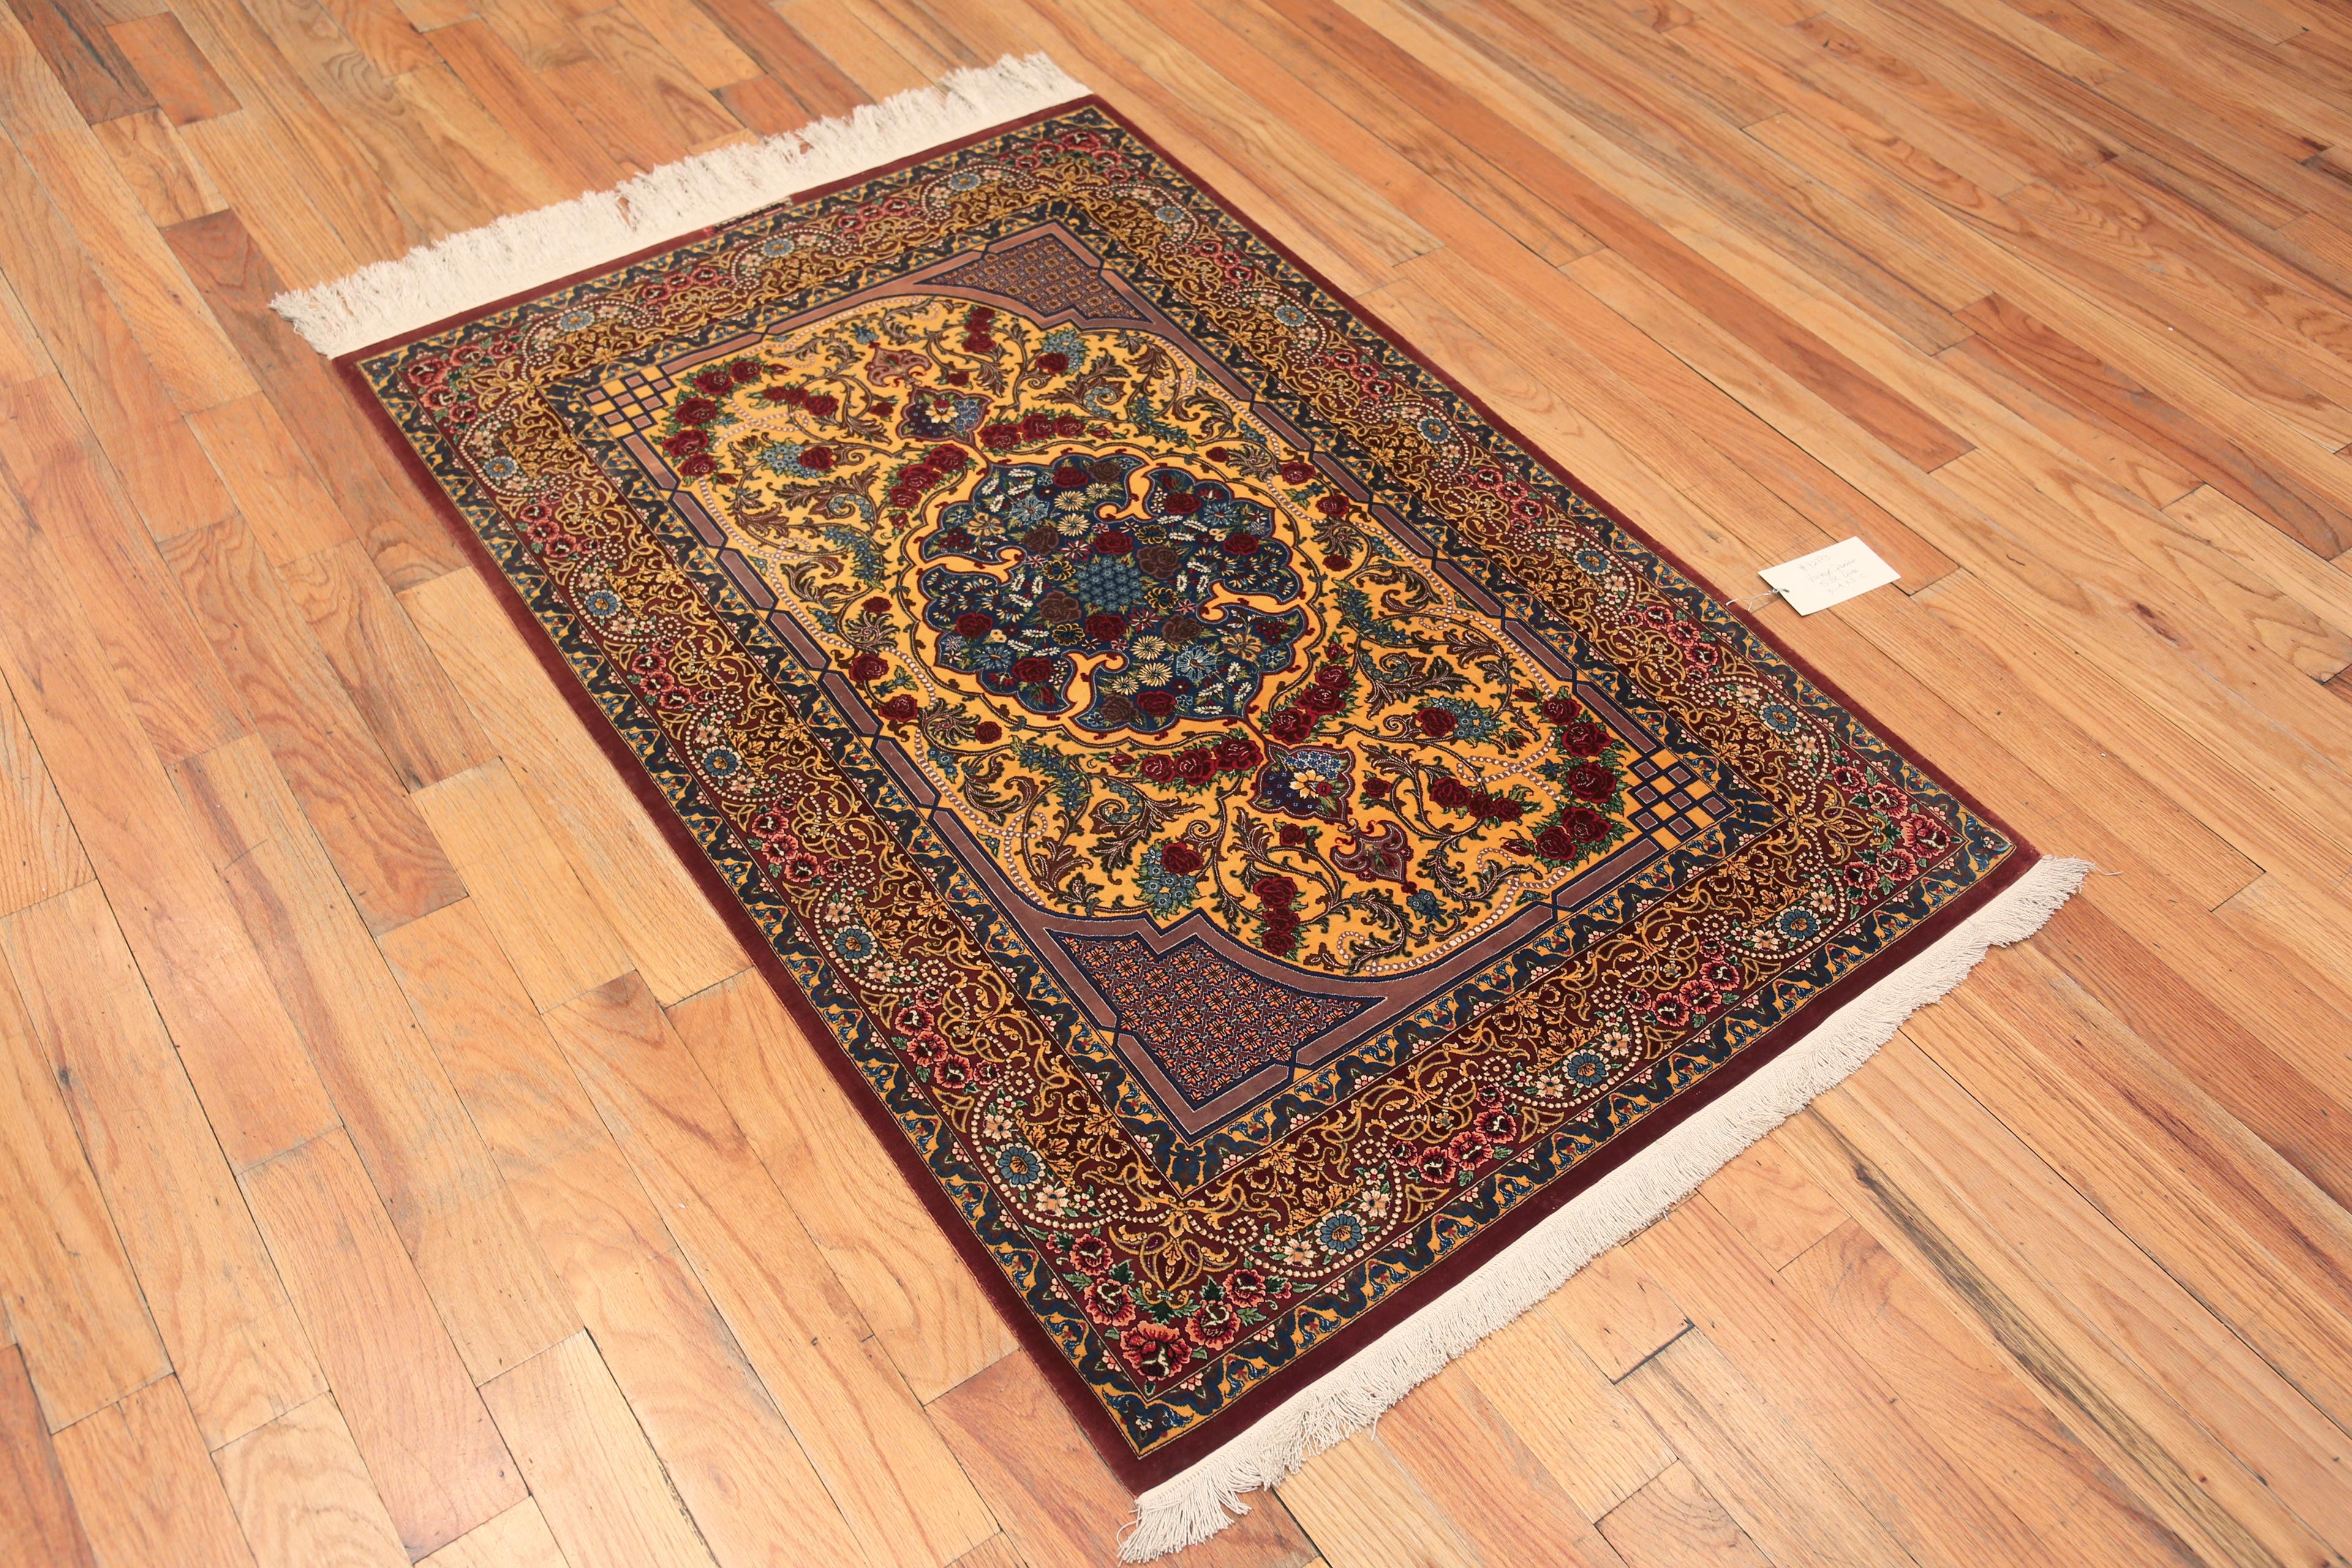 Fine Small Artistic Gold Color Luxurious Vintage Persian Silk Qum Rug, country of origin: Persian Rugs, Circa date: Vintage